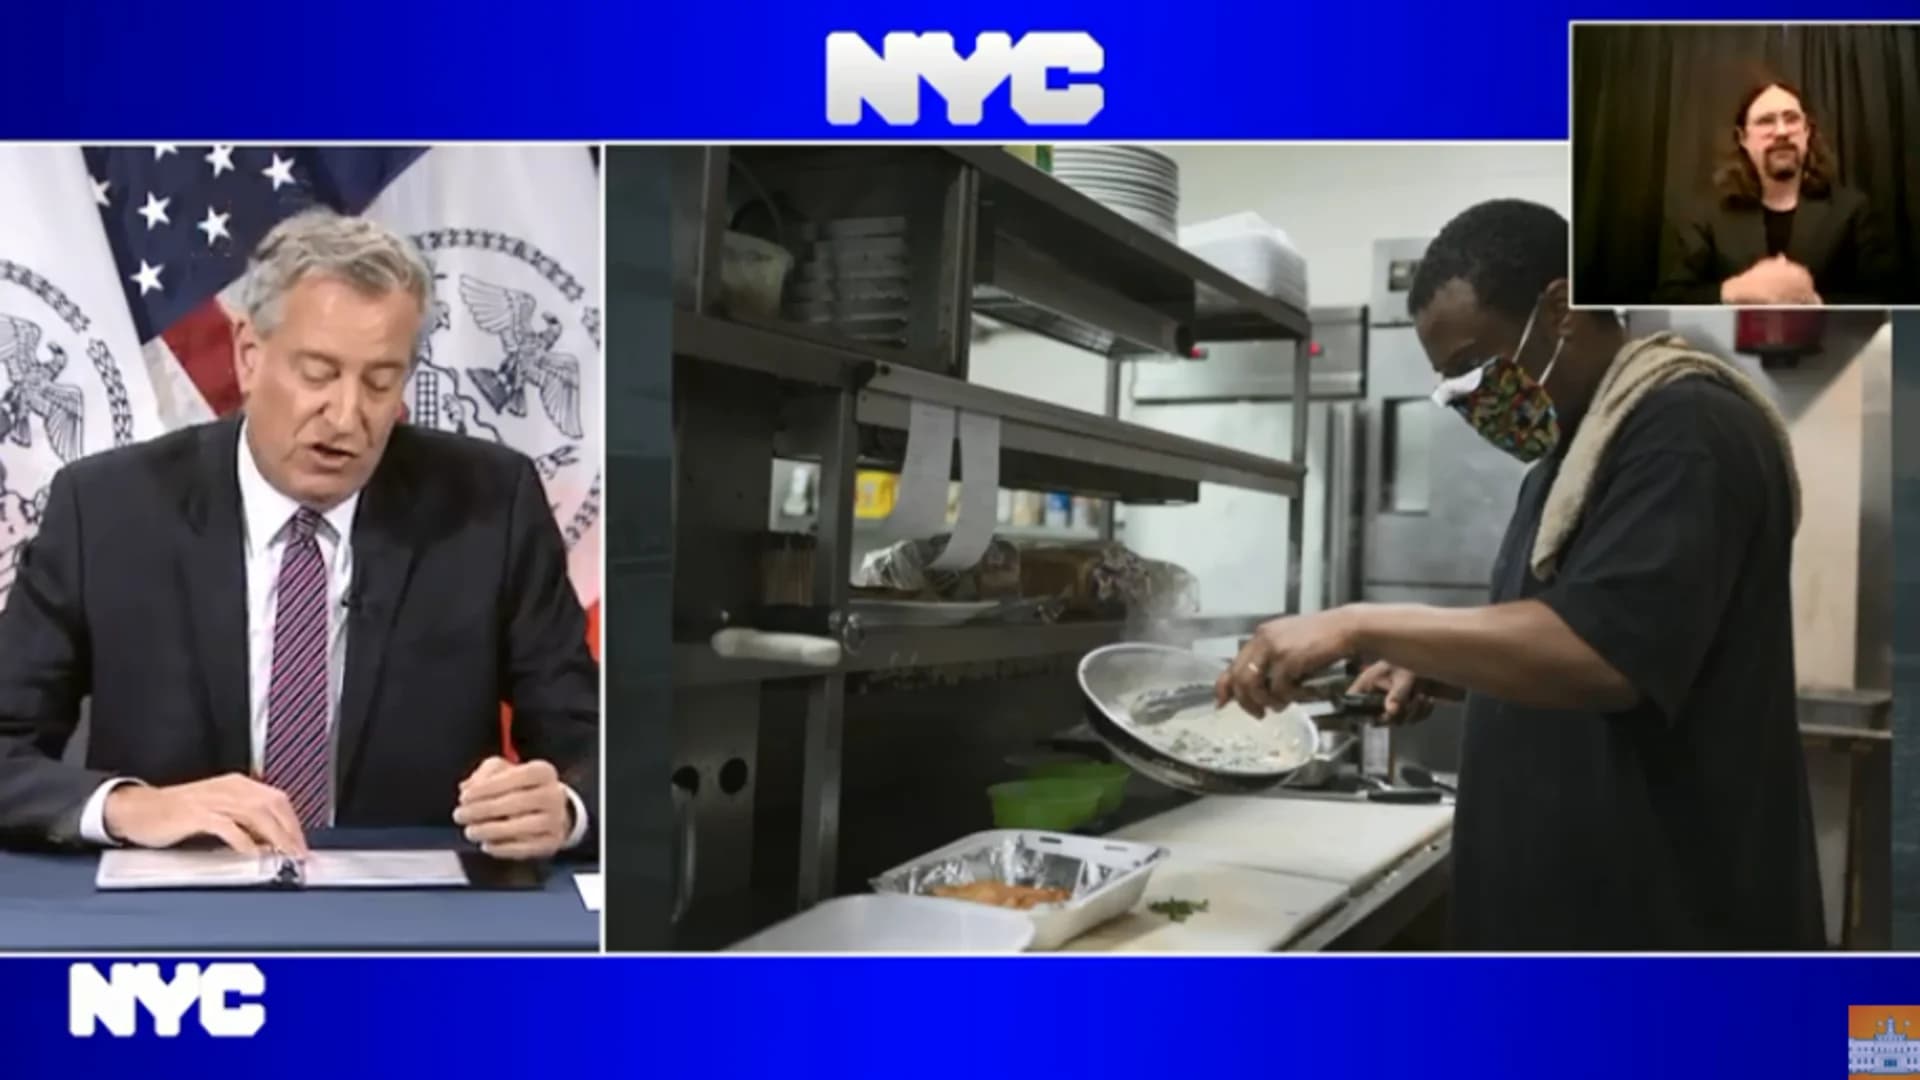 Mayor announces $3 million plan to revitalize the restaurant business in NYC following COVID-19